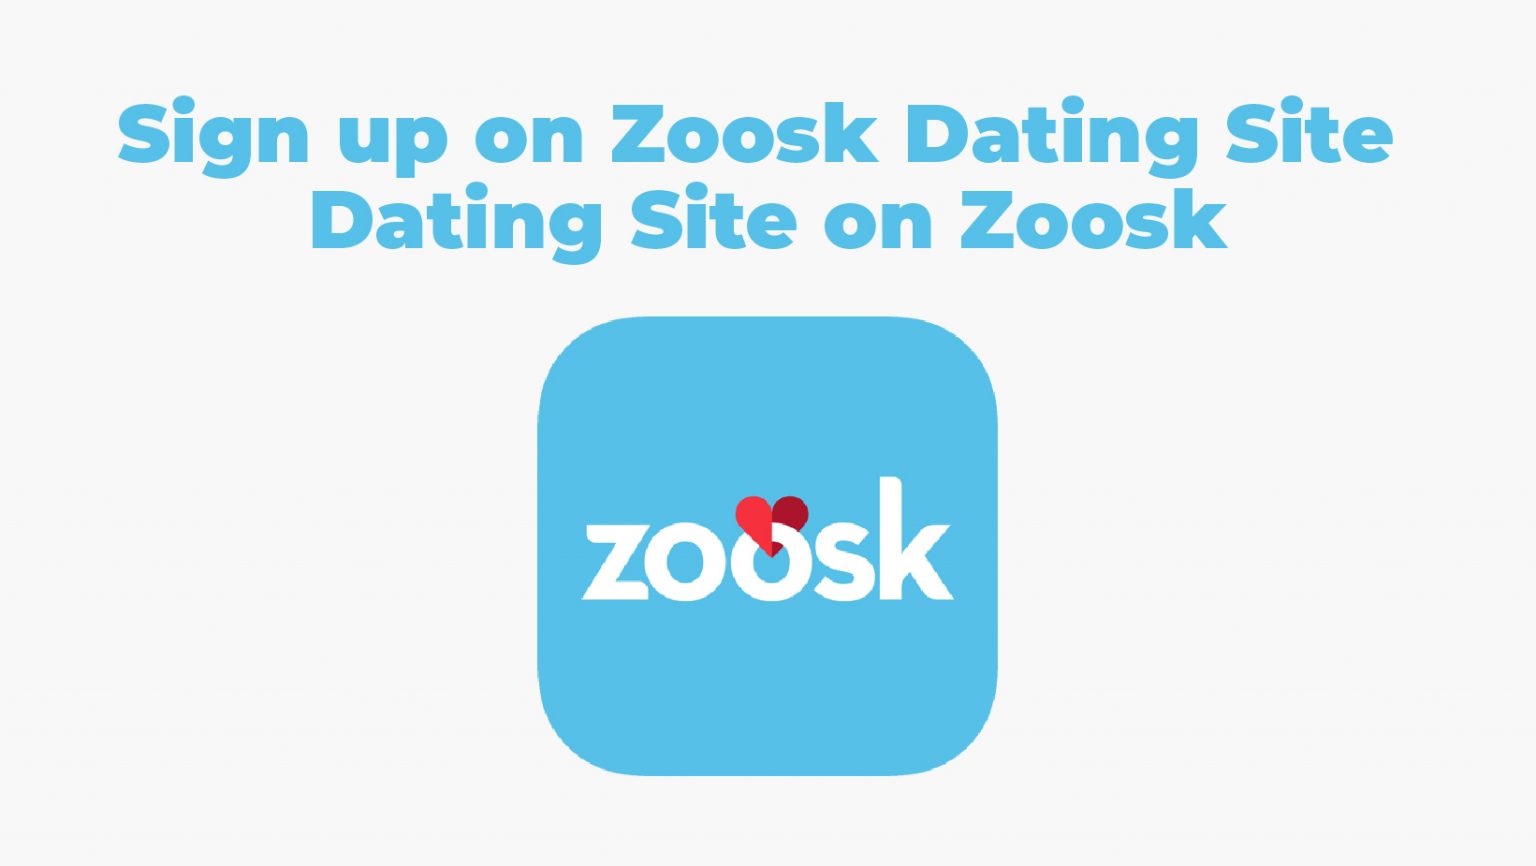 Zoosk Dating Site Sign Up: How to Join Zoosk